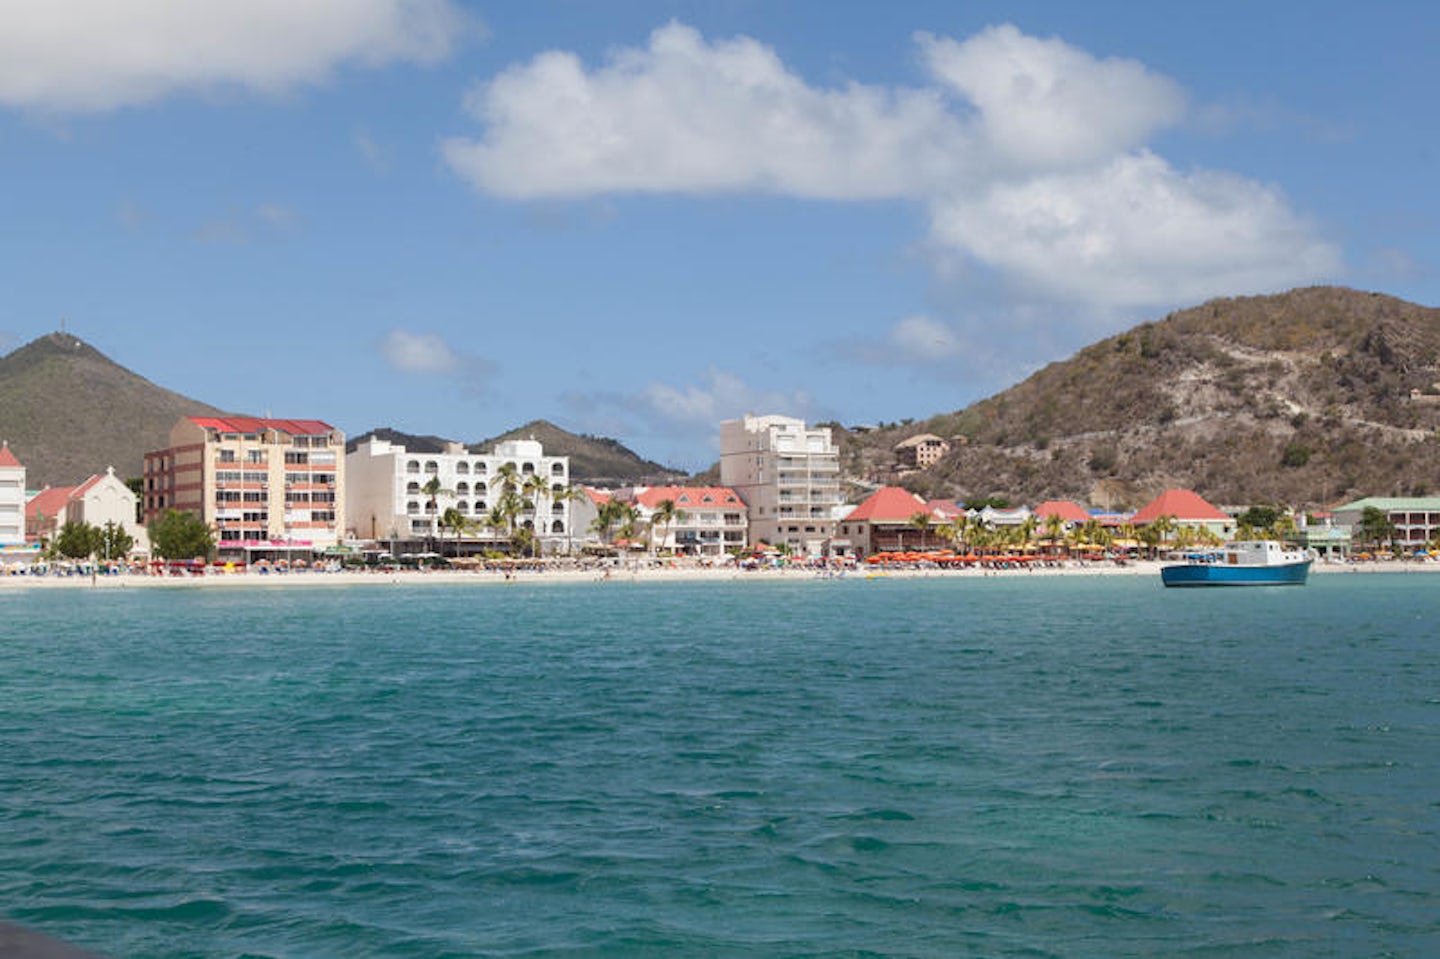 Water Taxi at St. Maarten Cruise Port